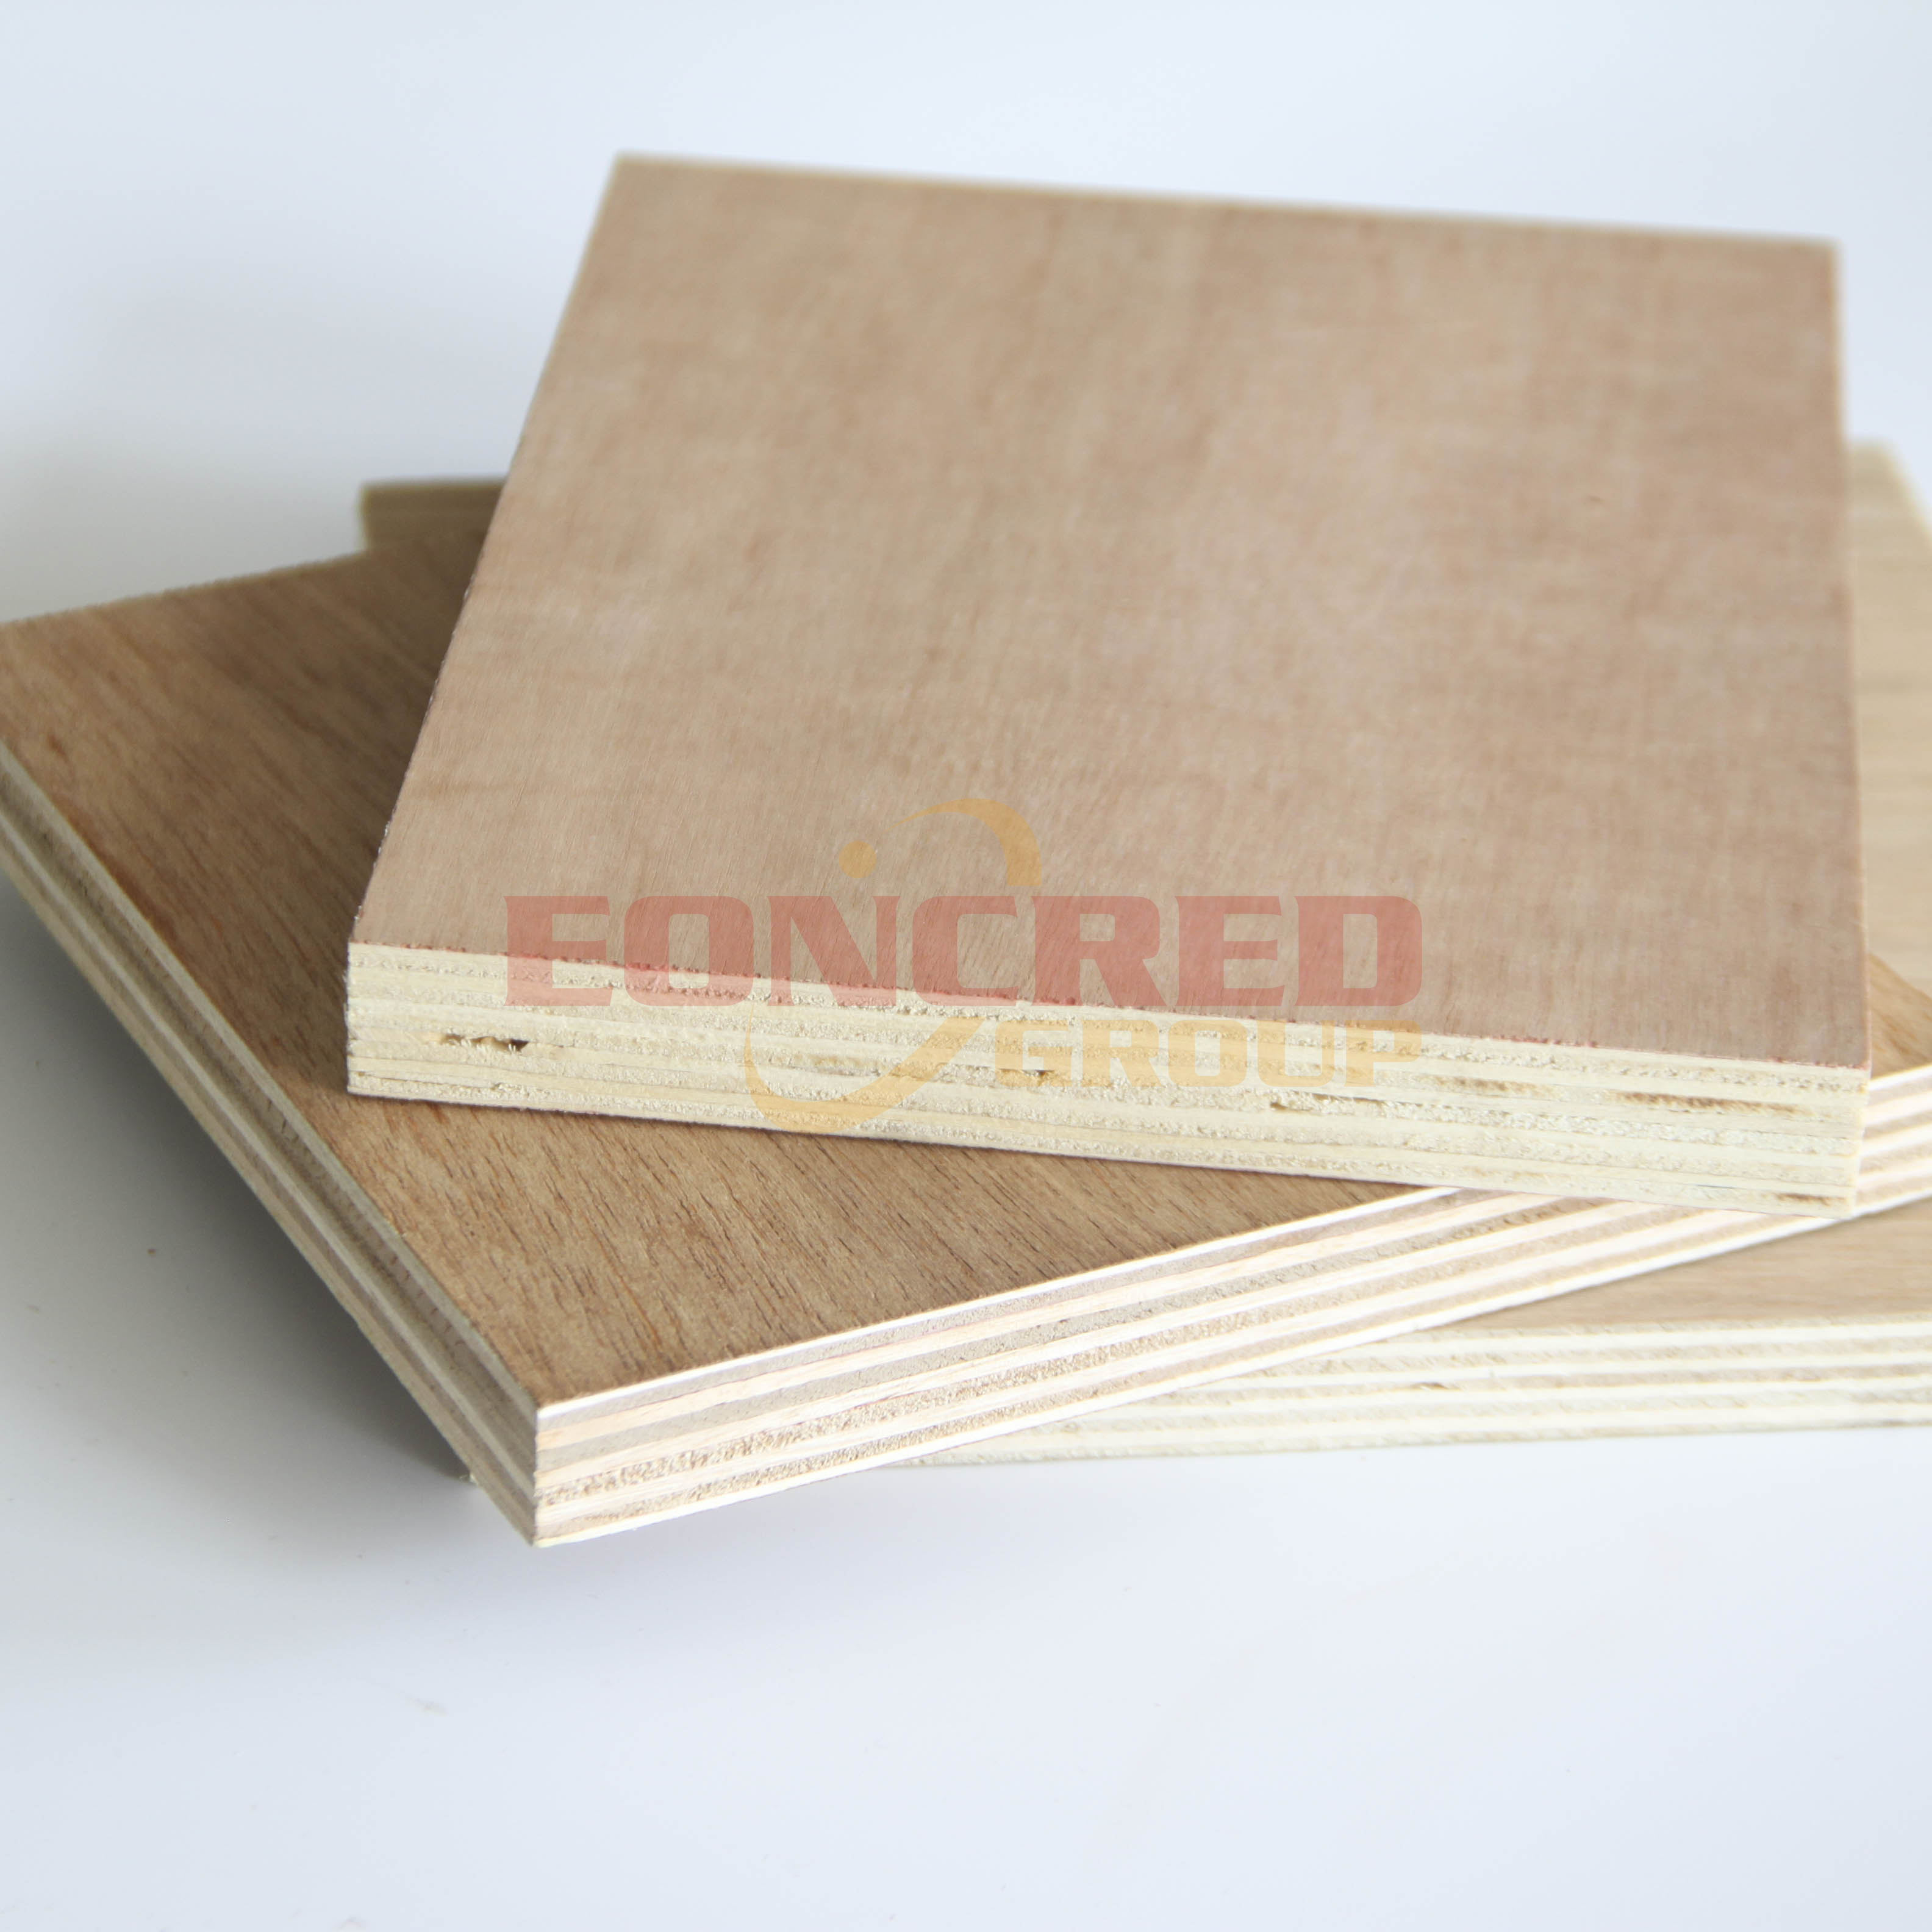 Bamboo Plywood Furniture Is Made of Hardwood Plywood 